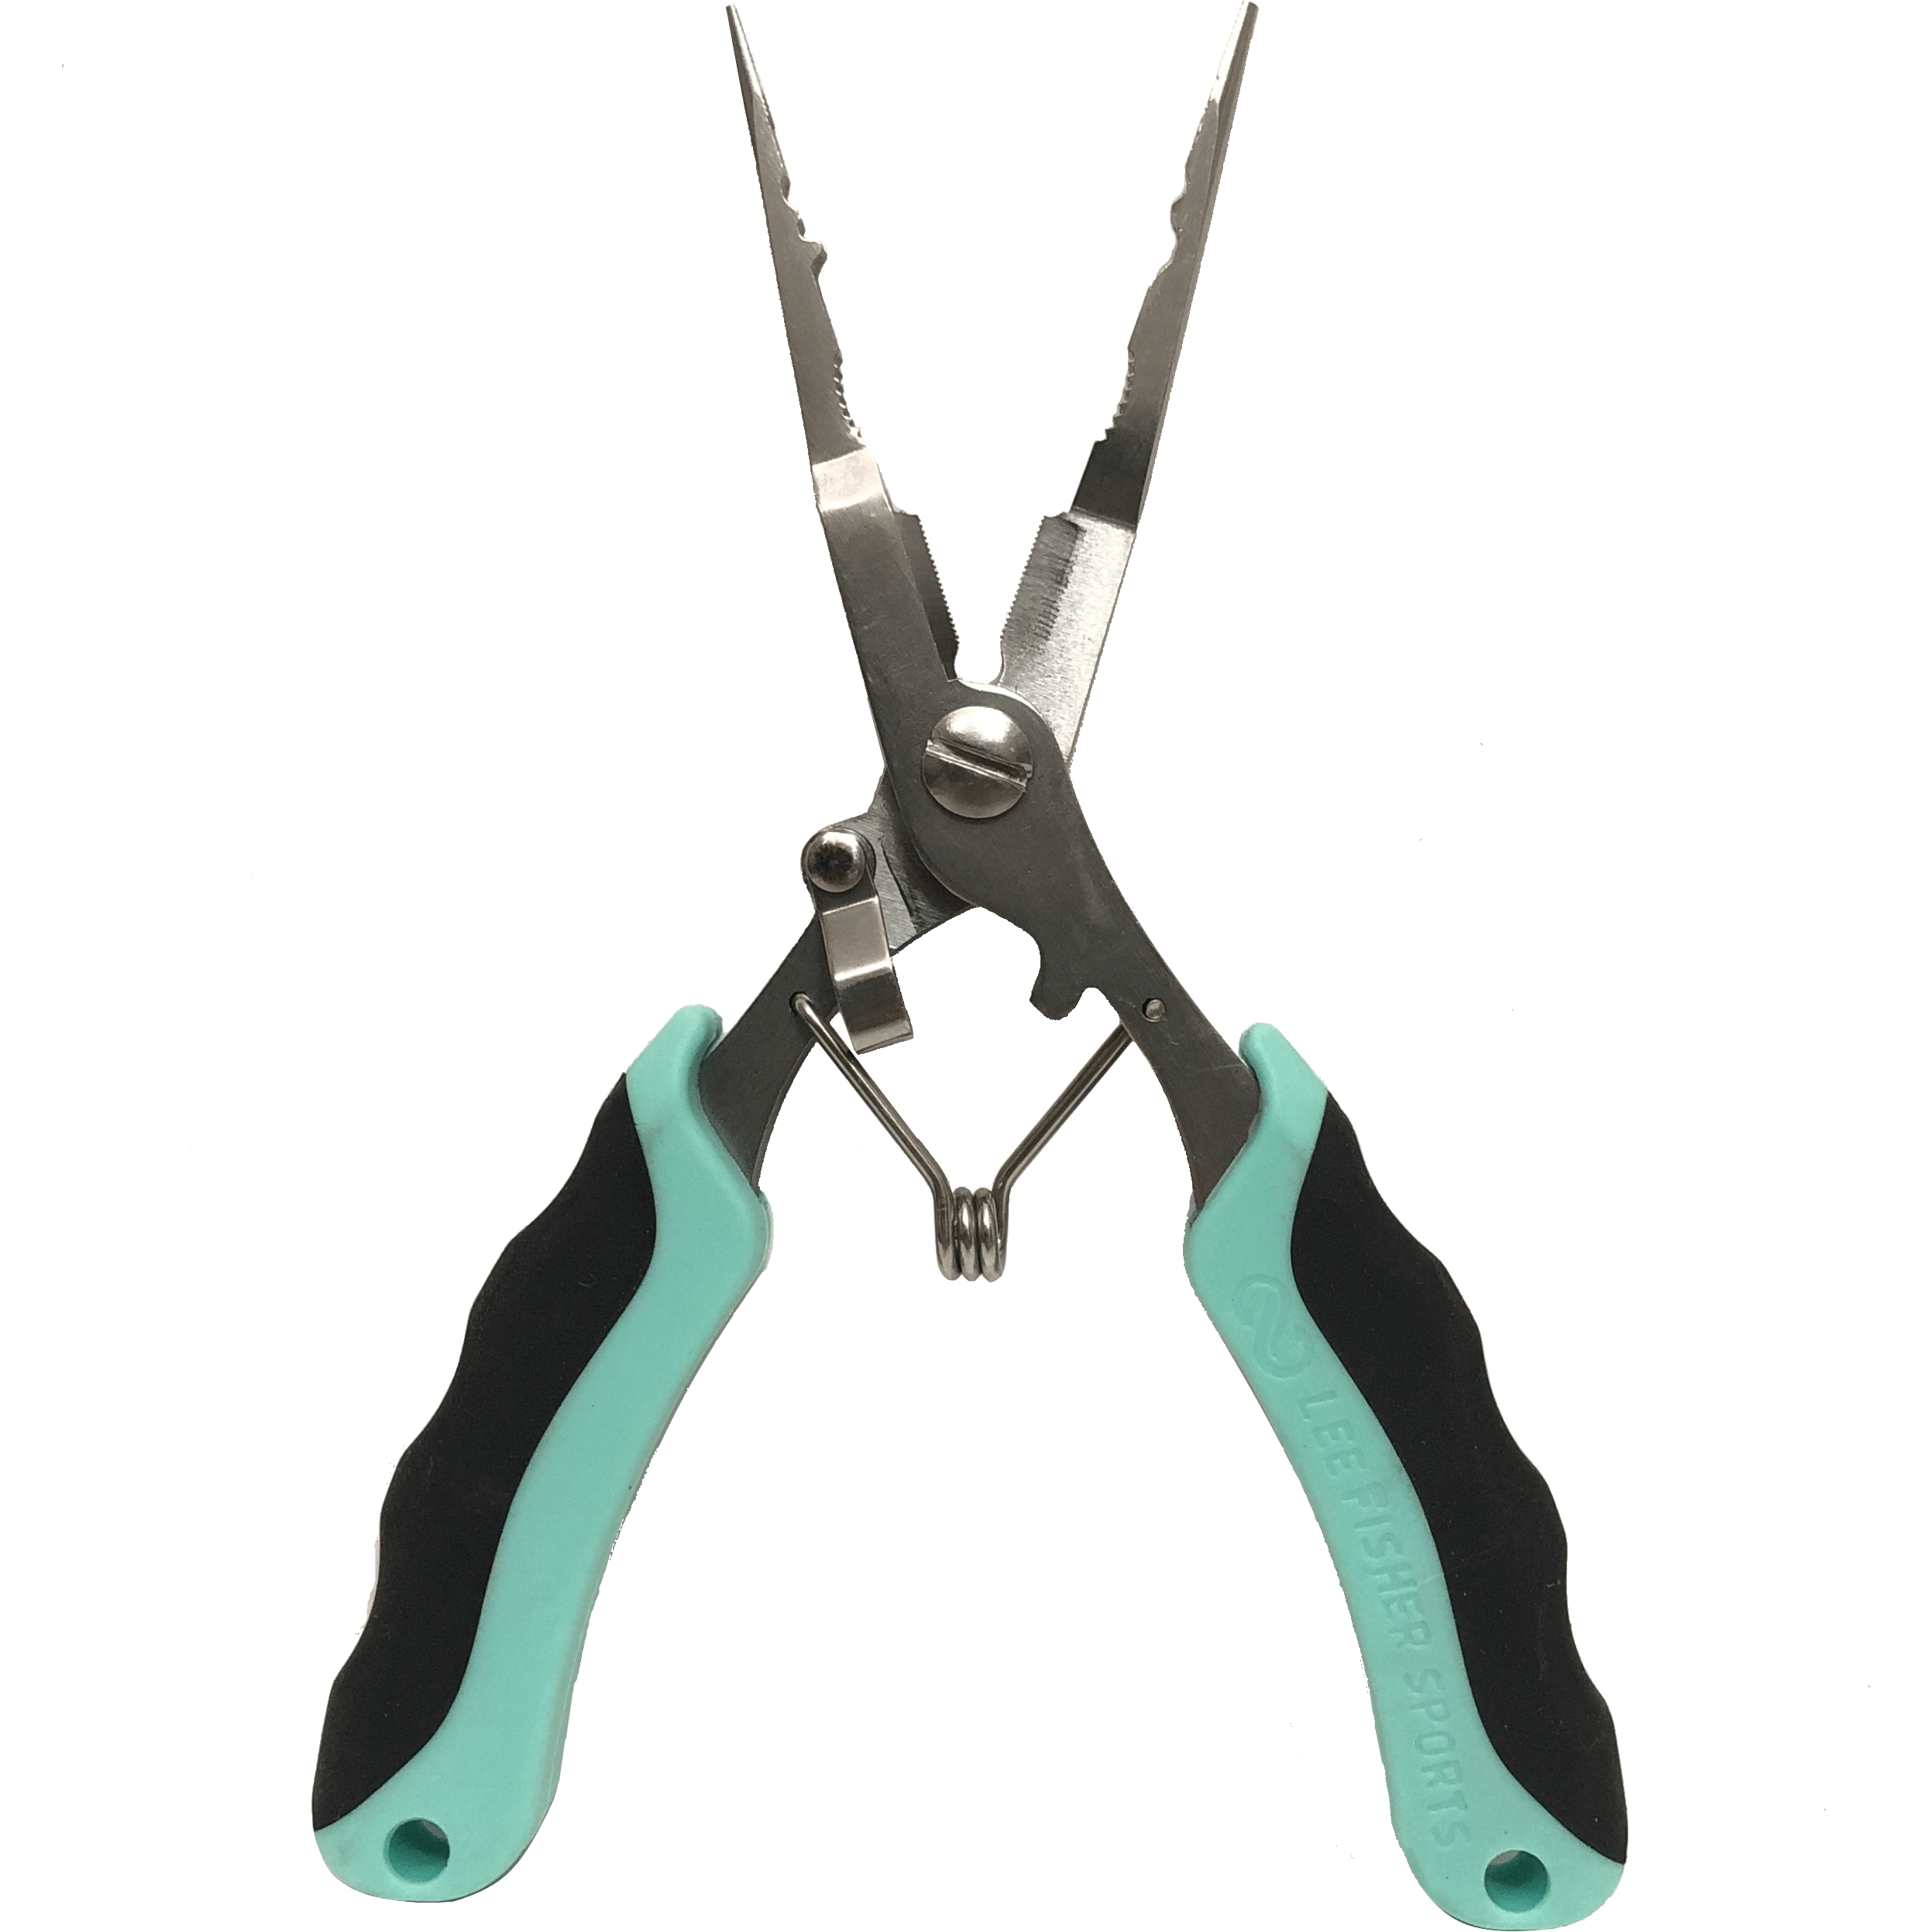 Lee Fisher Sports Plier-Multi-Use 6.5' Stainless Steel Fishing Pliers